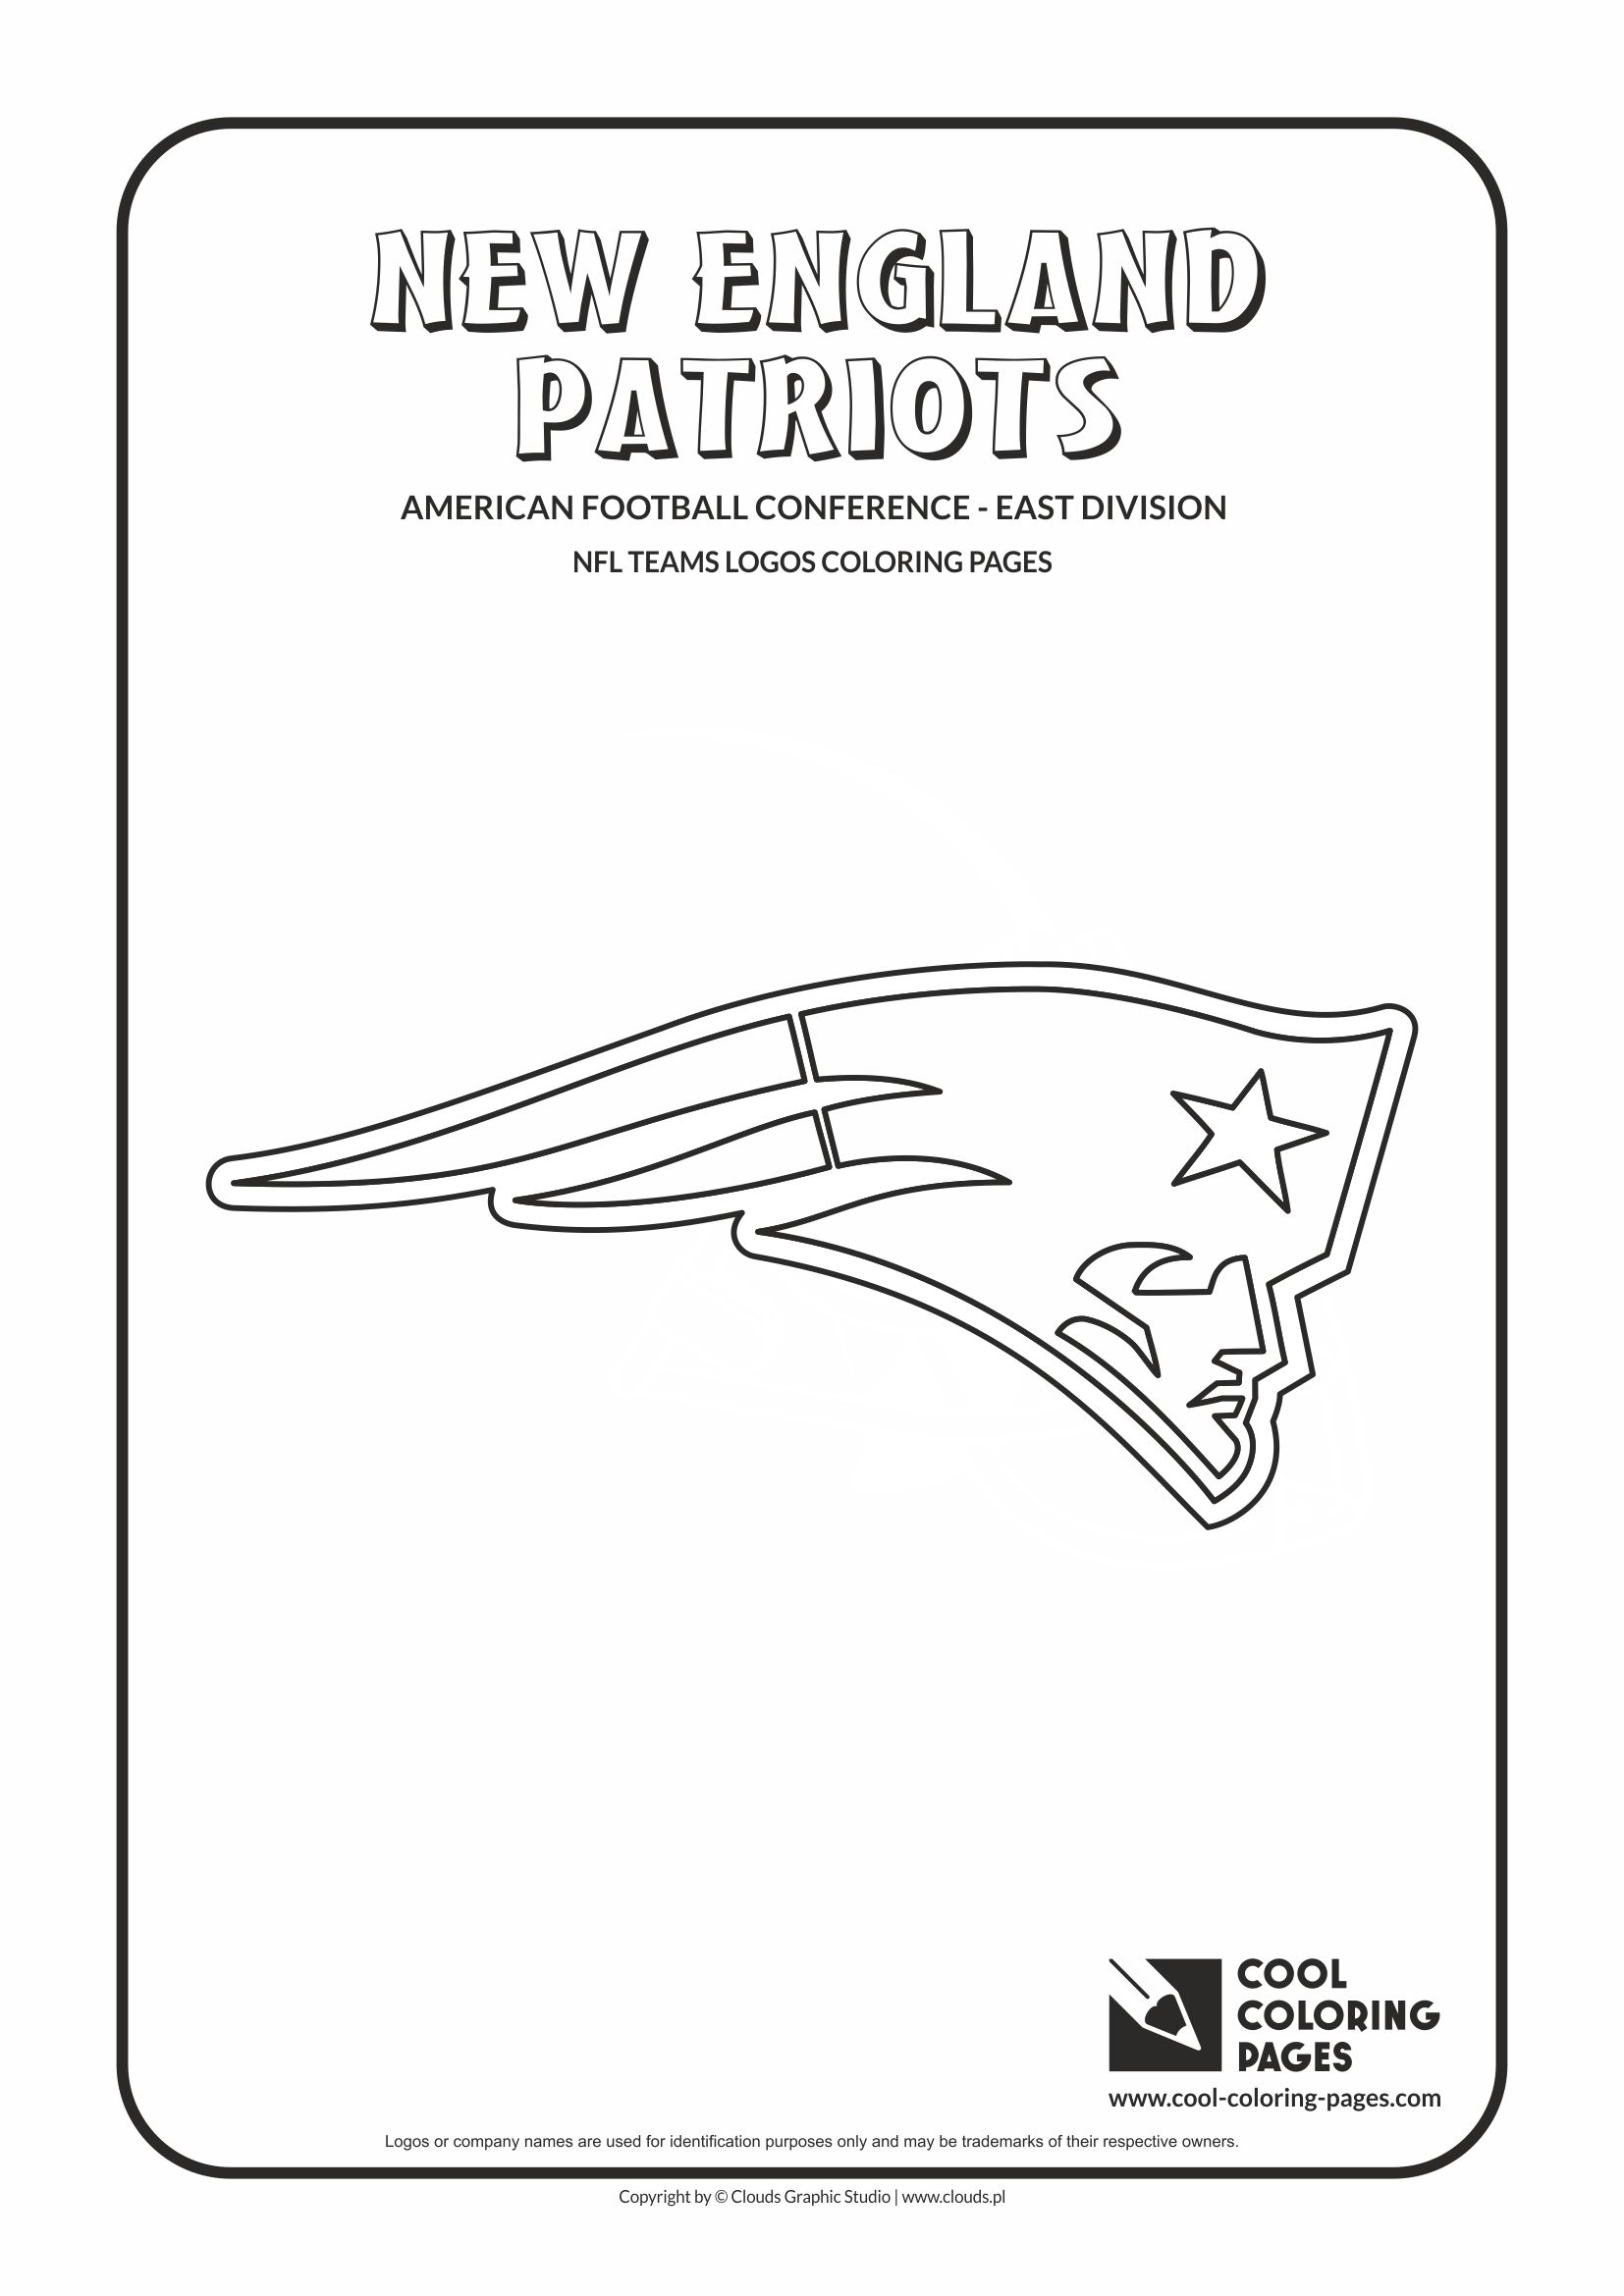 Cool Coloring Pages - NFL American Football Clubs Logos - American Football Conference - East Division / New England Patriots logo / Coloring page with New England Patriots logo